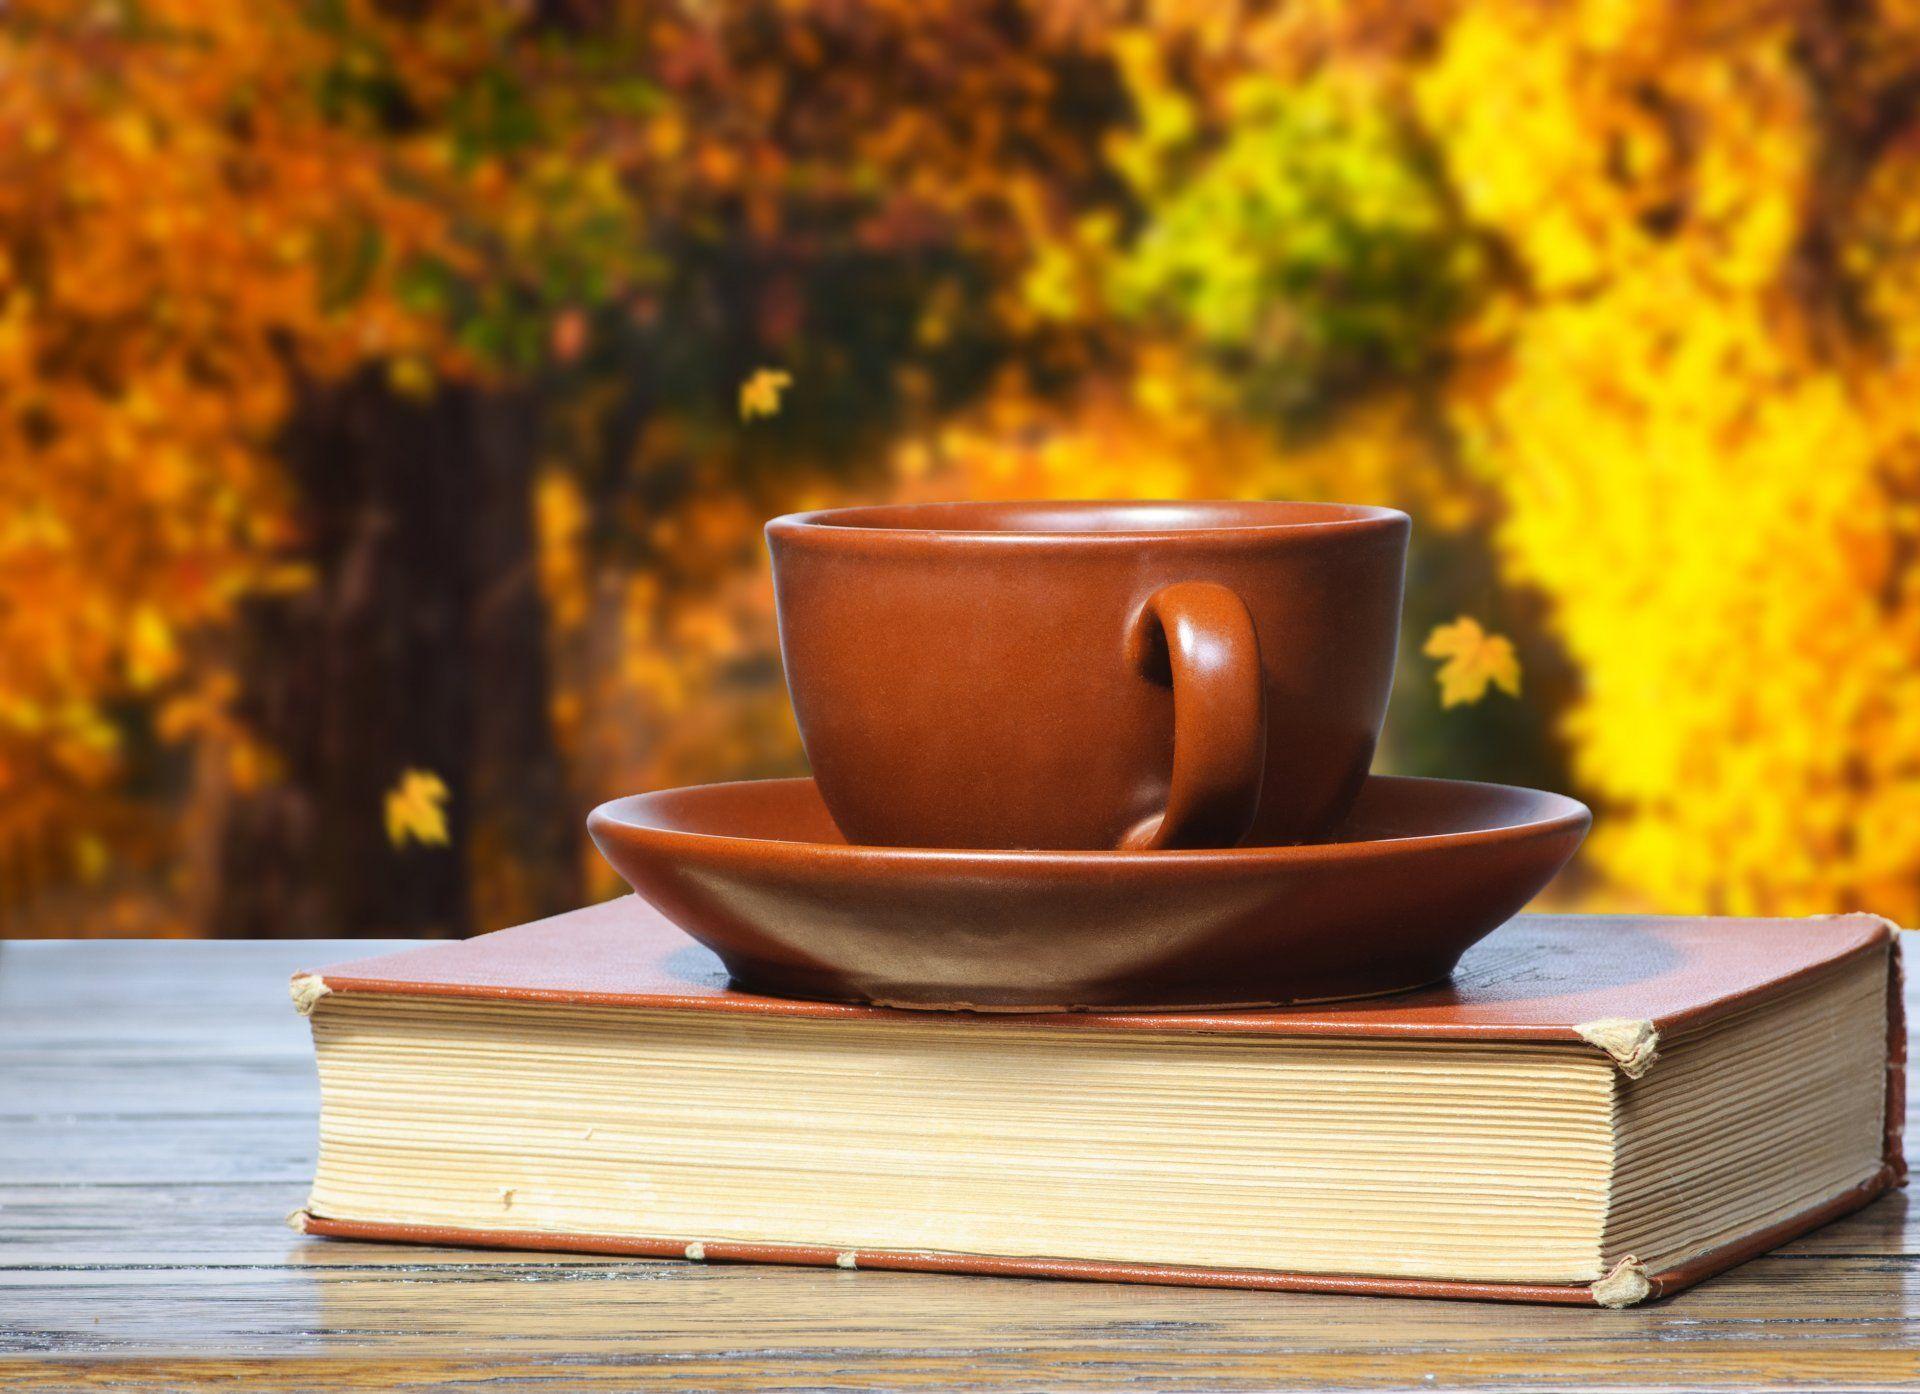 Coffee Winter And Books Wallpapers - Wallpaper Cave